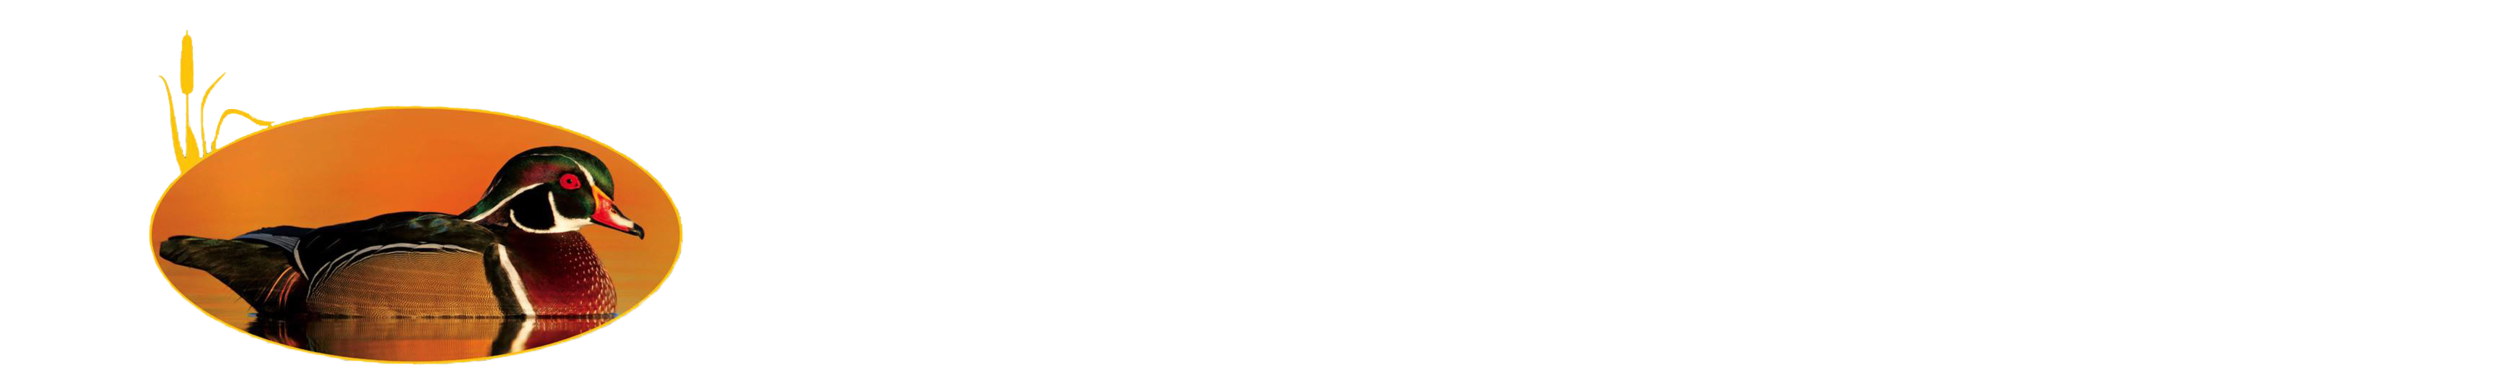 The Wooden Duck – Real Estate Brokerage Inc.